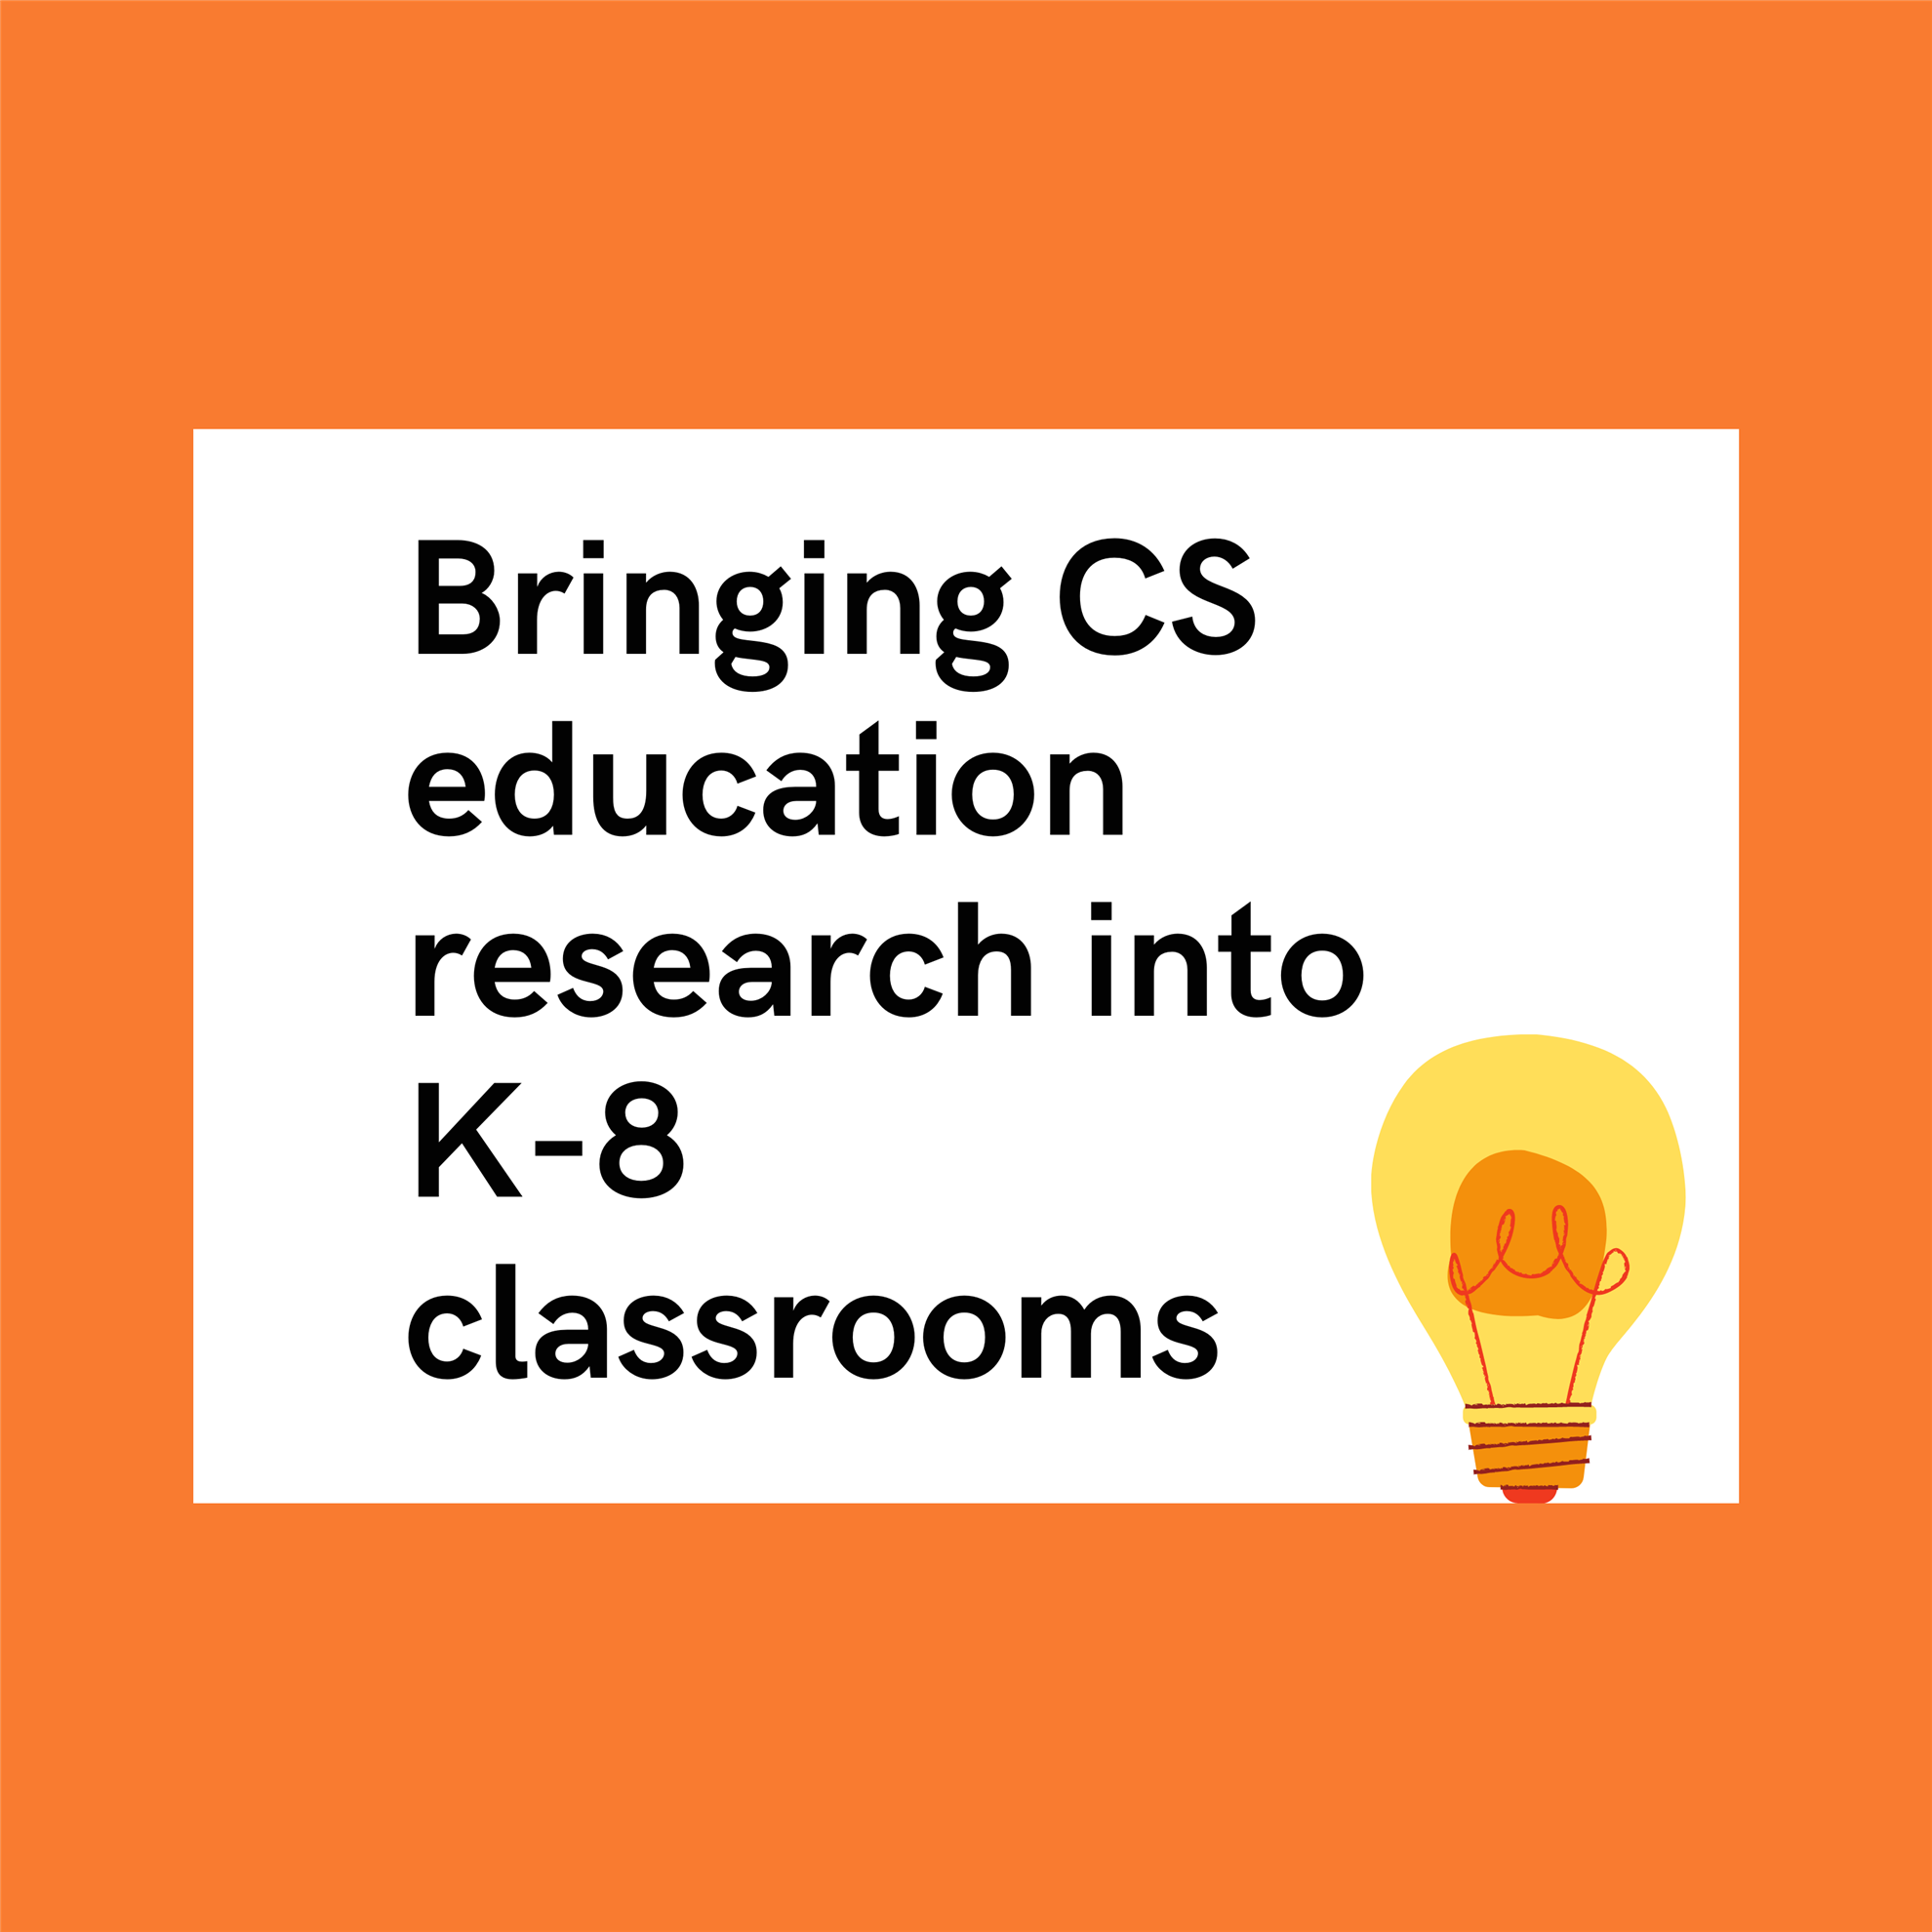 The words "Bringing CS education into K-8 classrooms" sit in a white text box over an orange background. There is a vector lightbulb graphic in the bottom right corner.